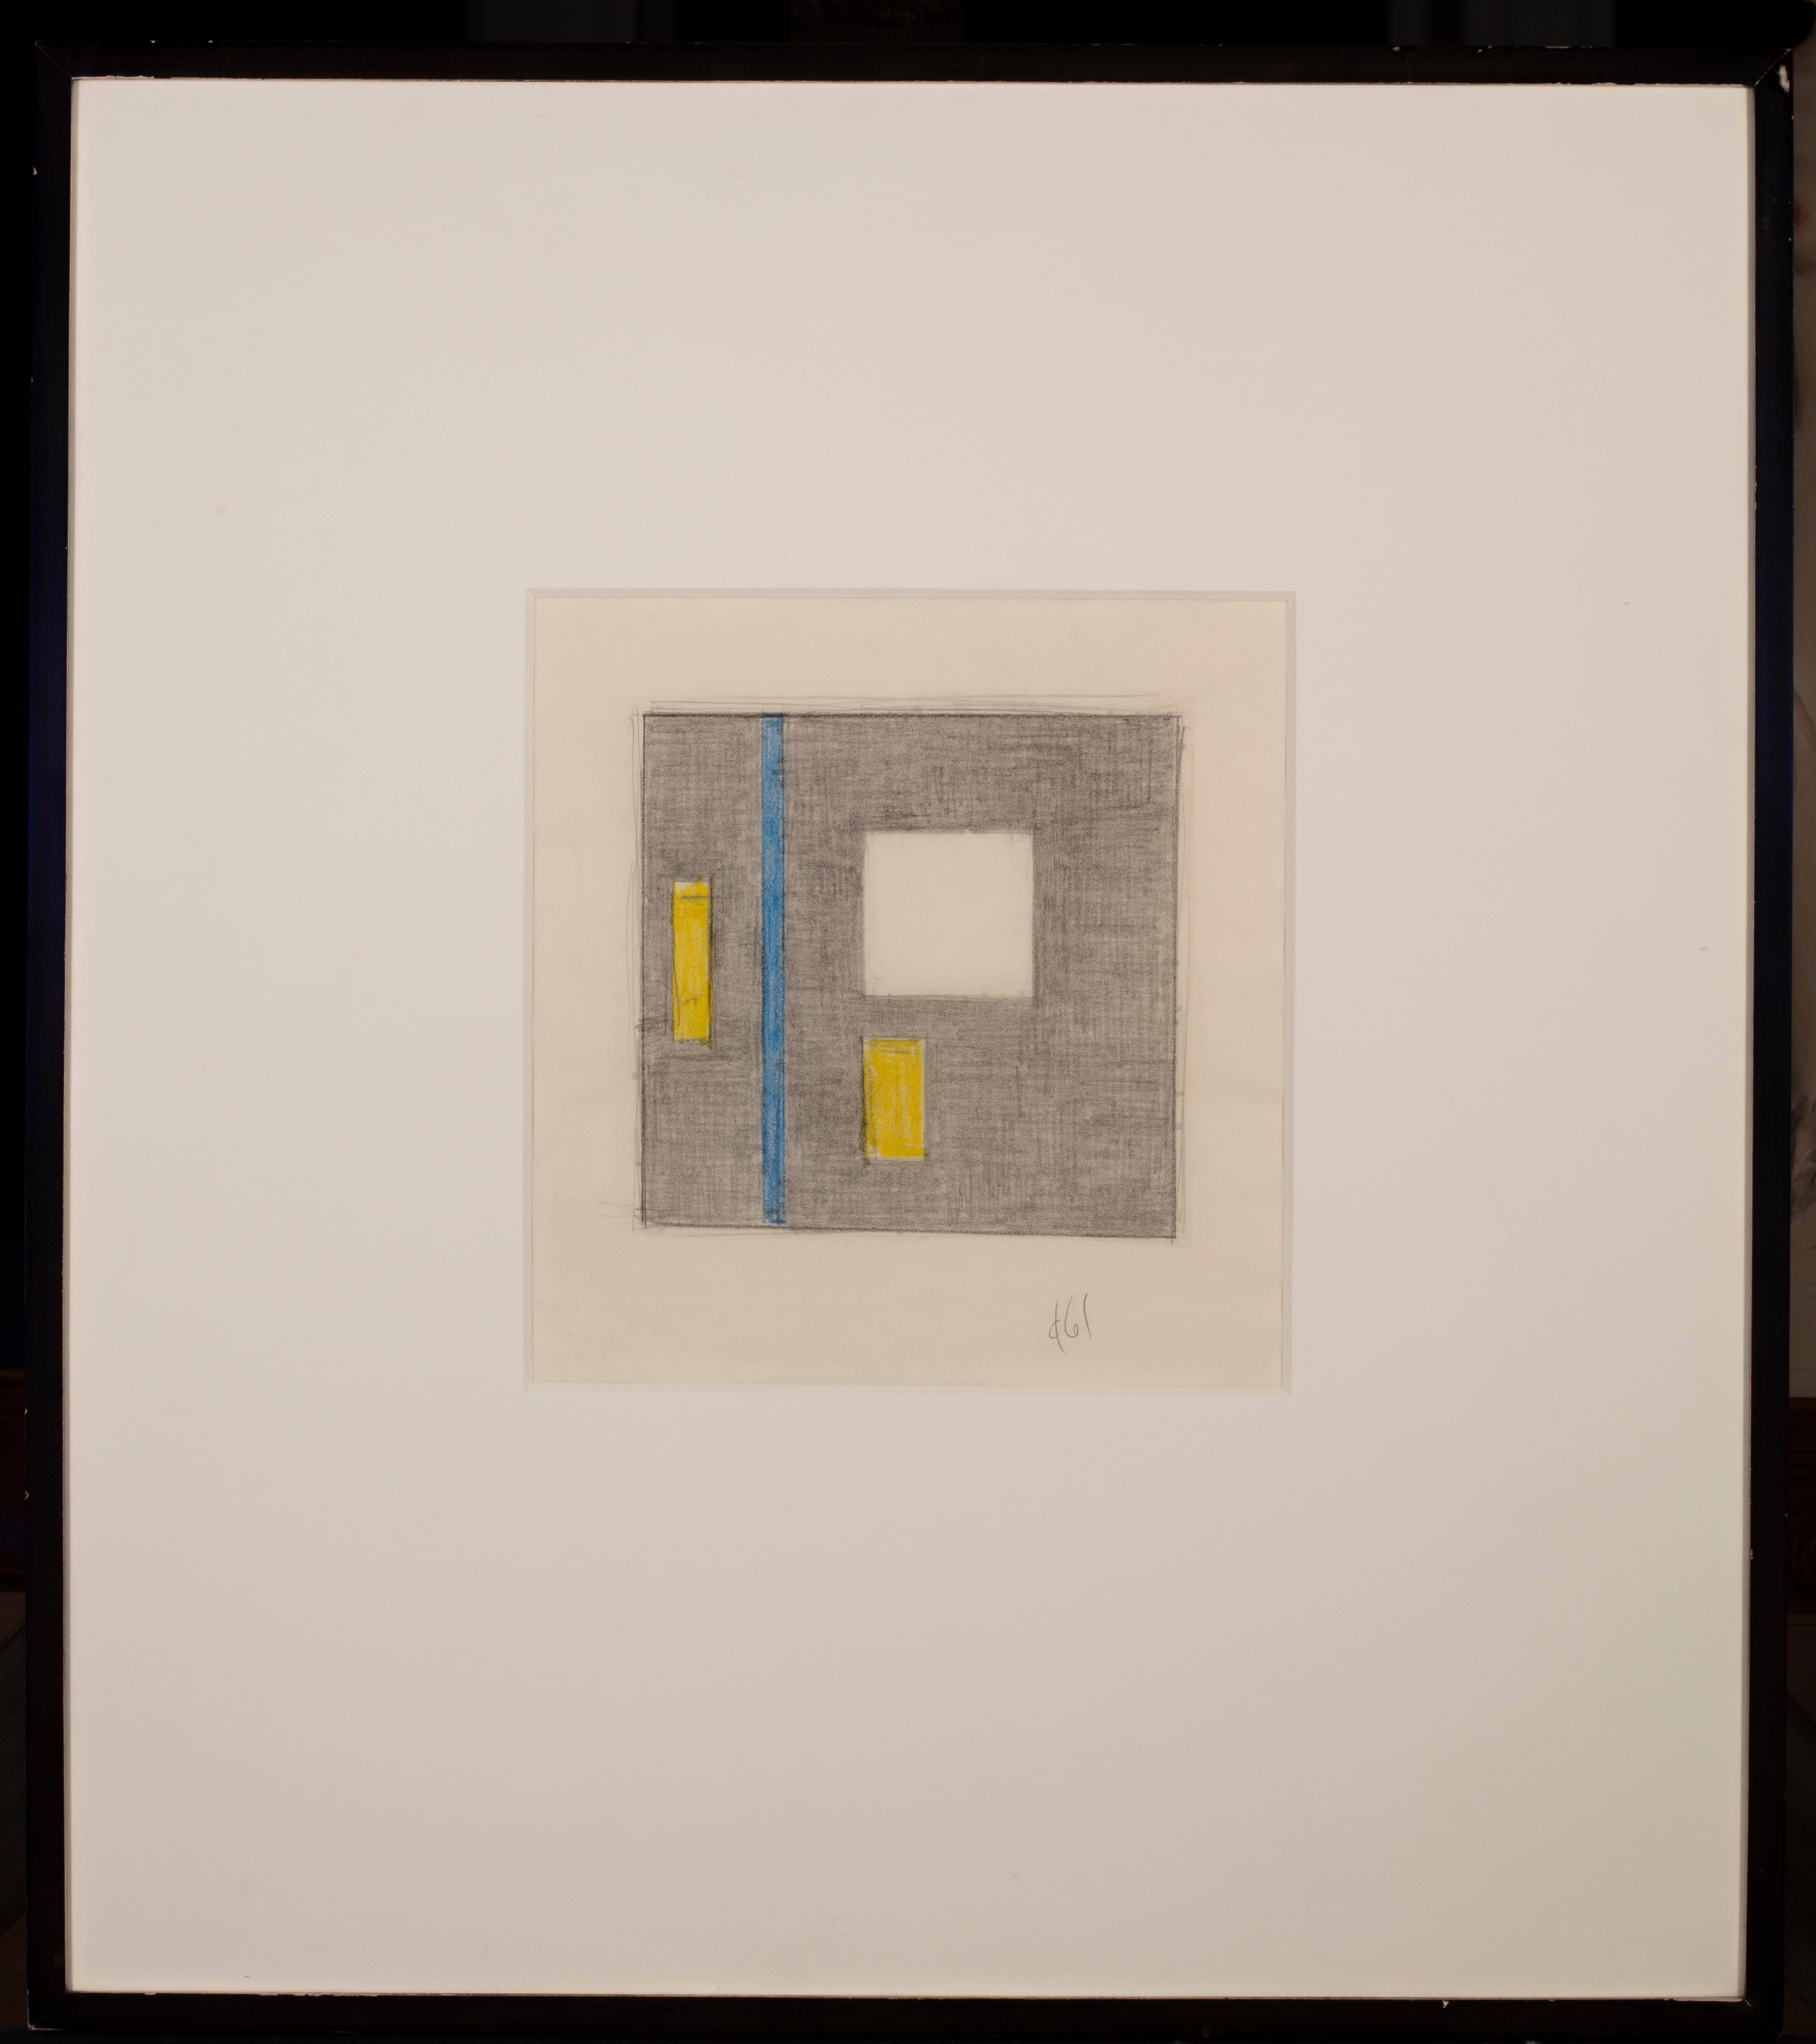 Burgoyne Diller Abstract Drawing - "White Square"